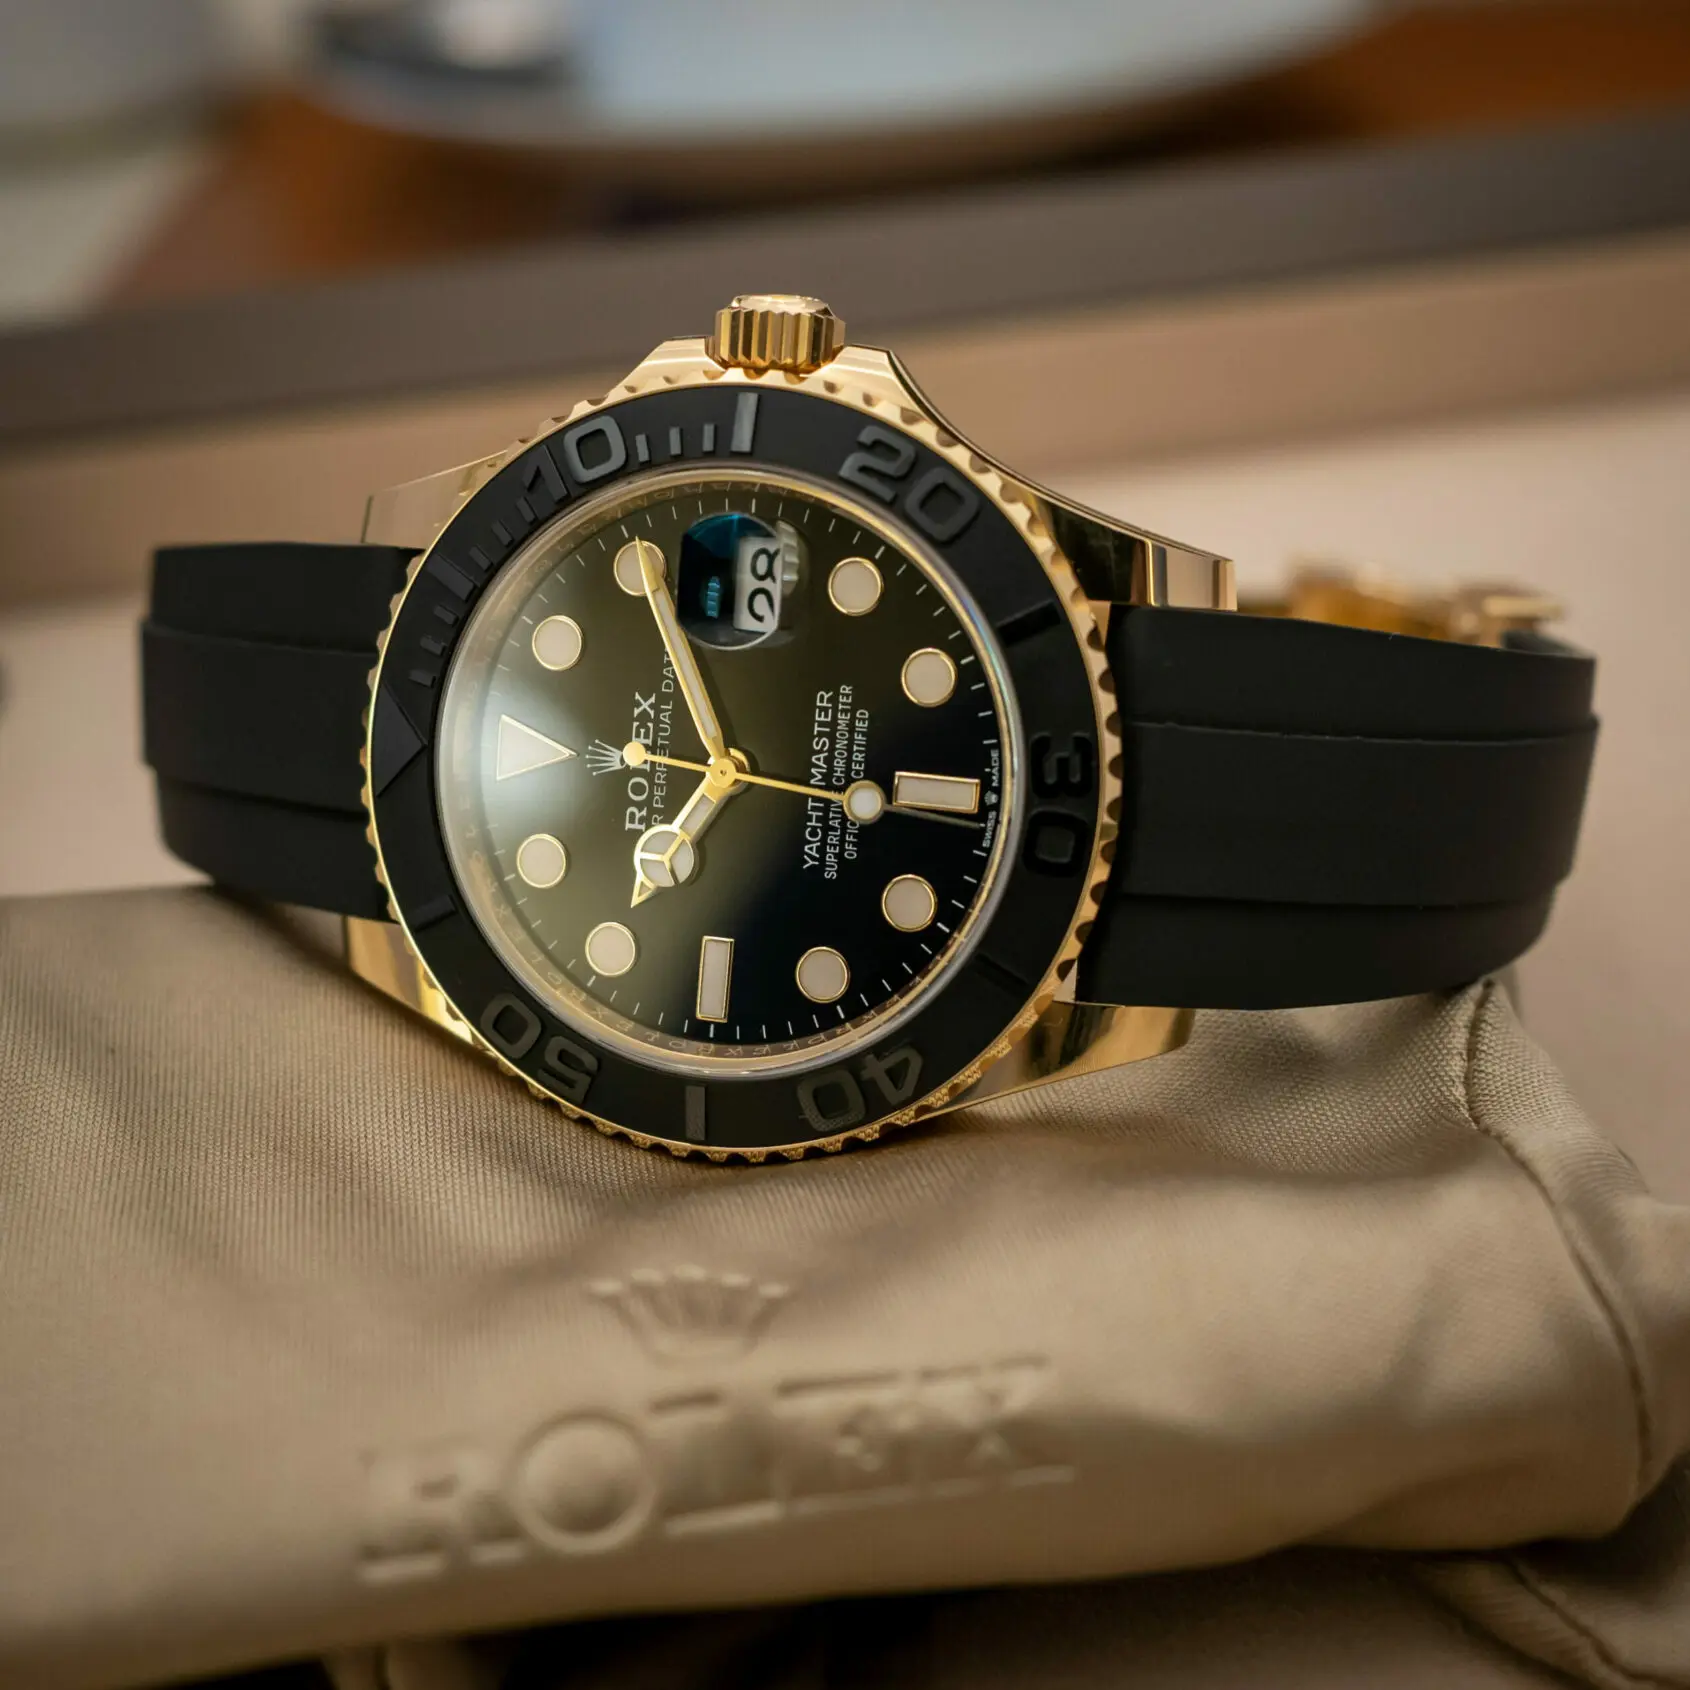 Rolex Yacht-Master 40 - Is it too small for a medium size wrist